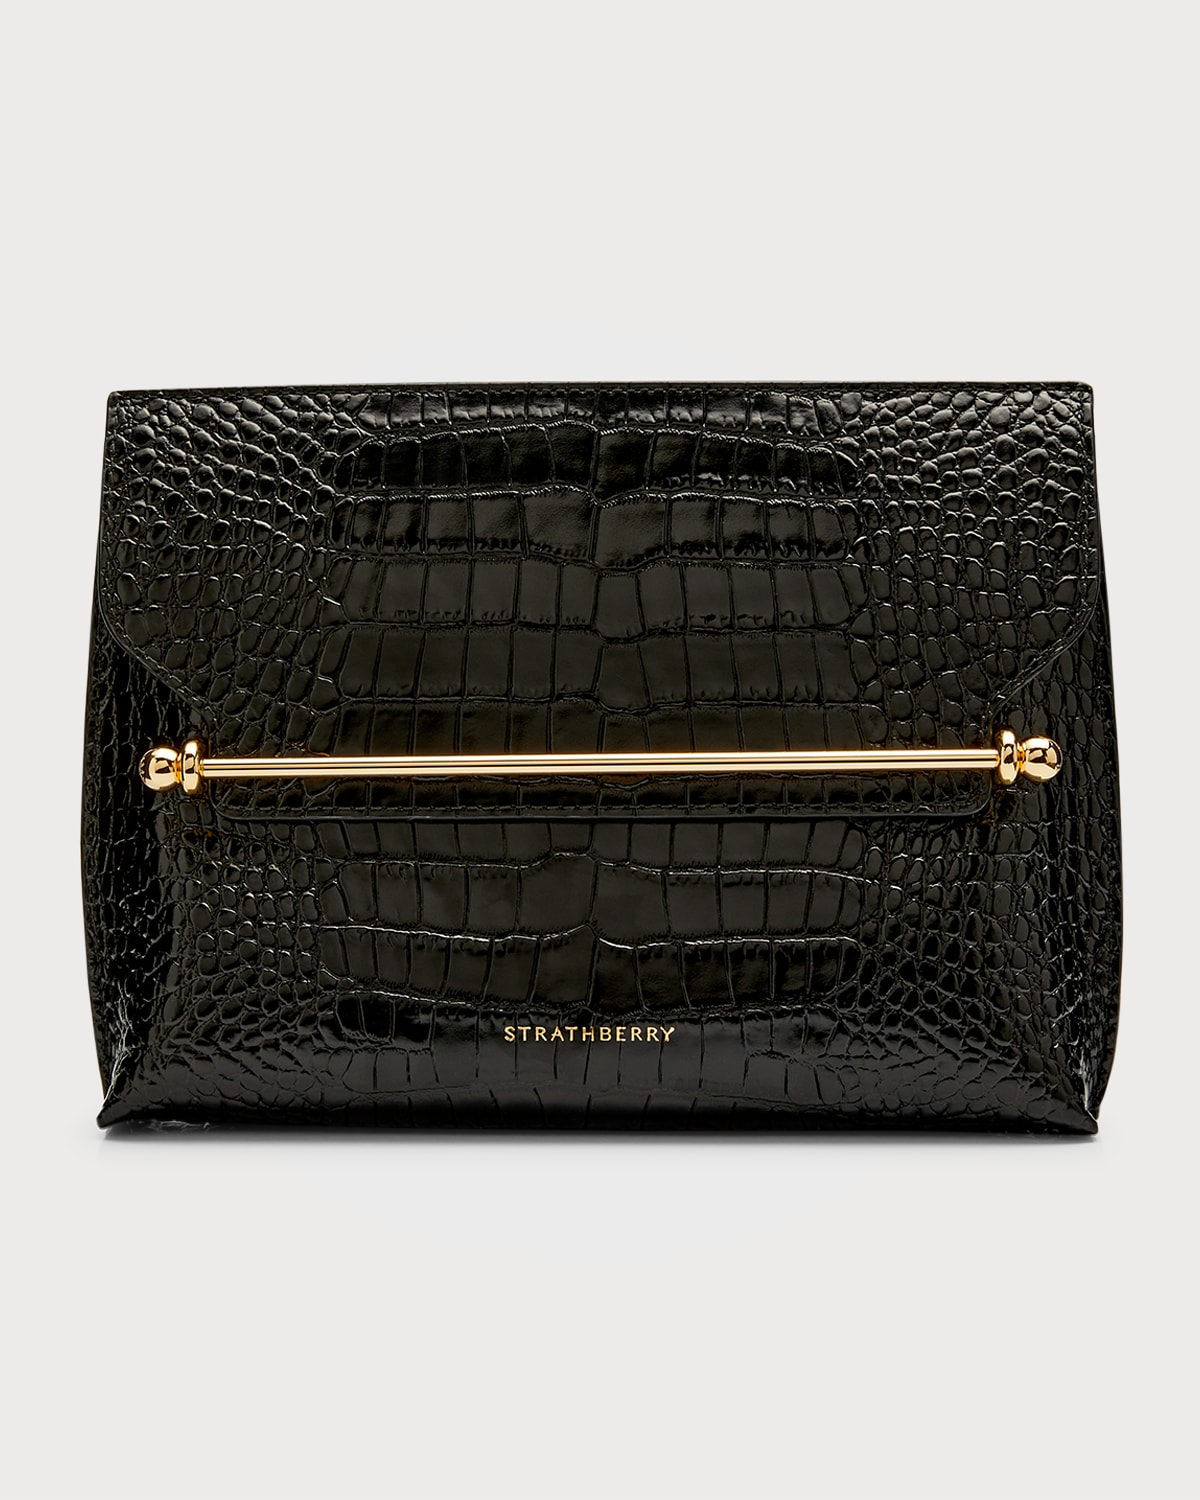 STRATHBERRY Croc-Embossed Leather Chain Shoulder Bag | Neiman Marcus